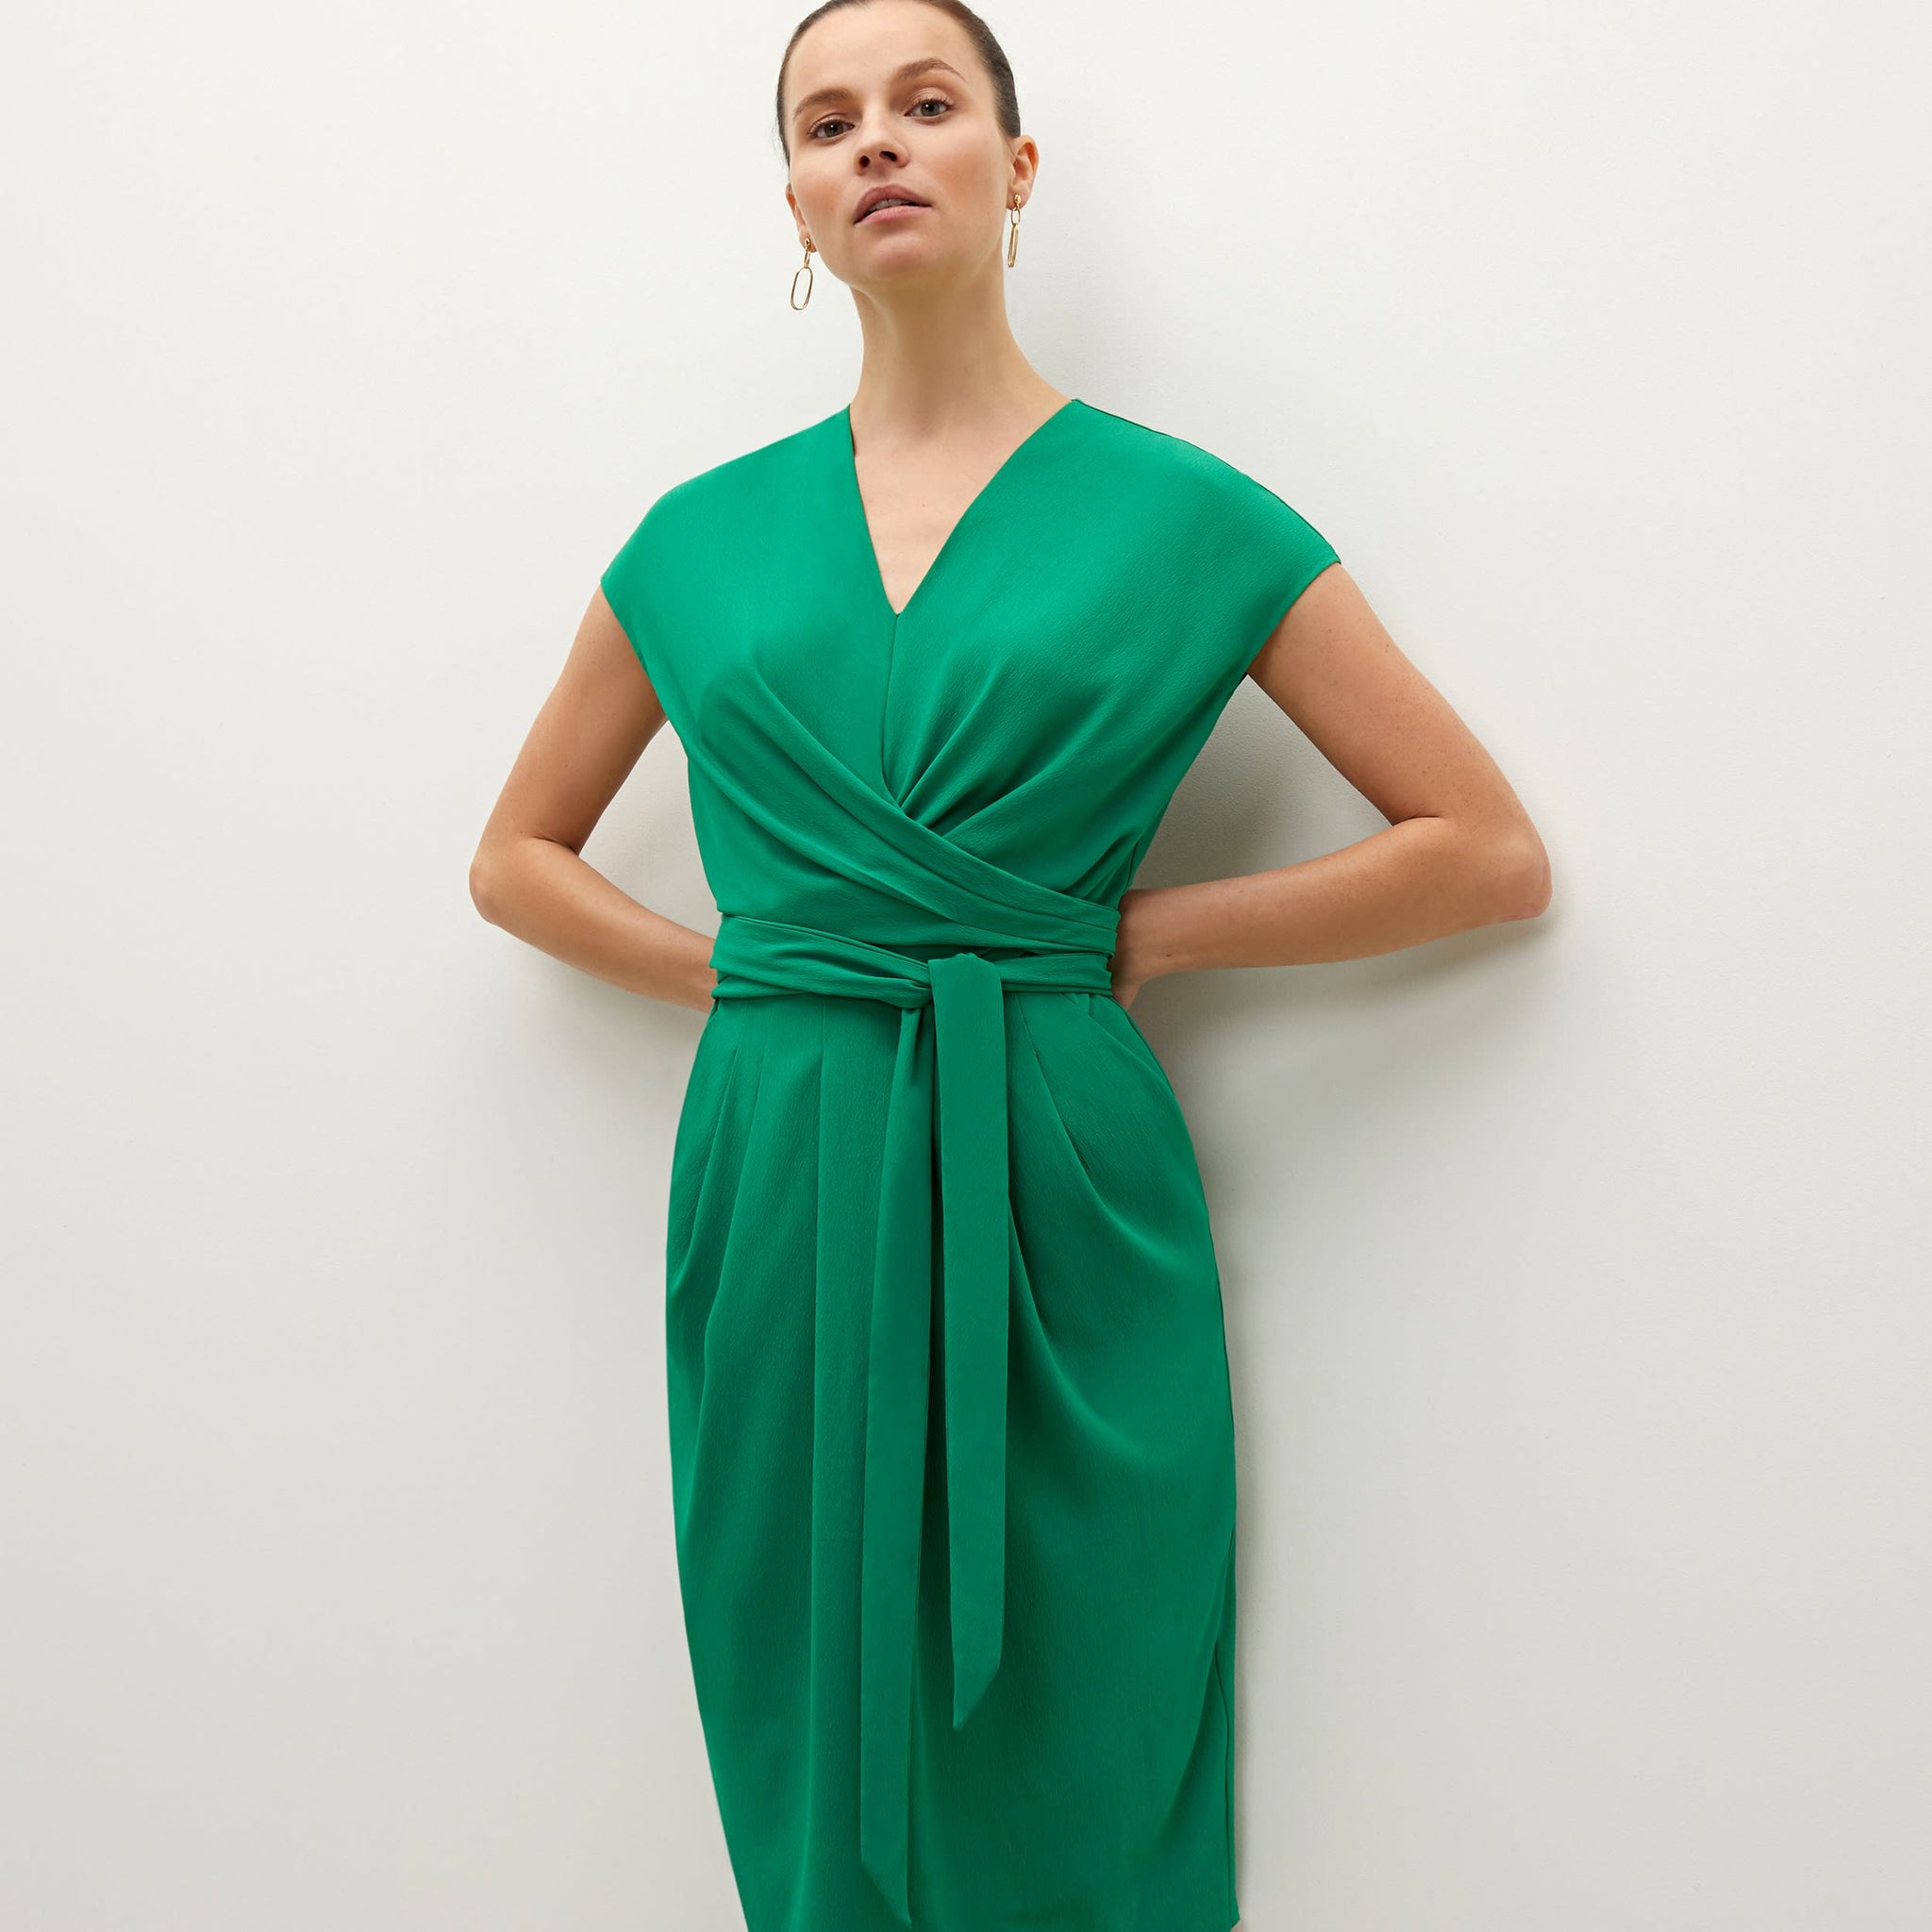 Detail image of a woman standing wearing the Noel dress in emerald